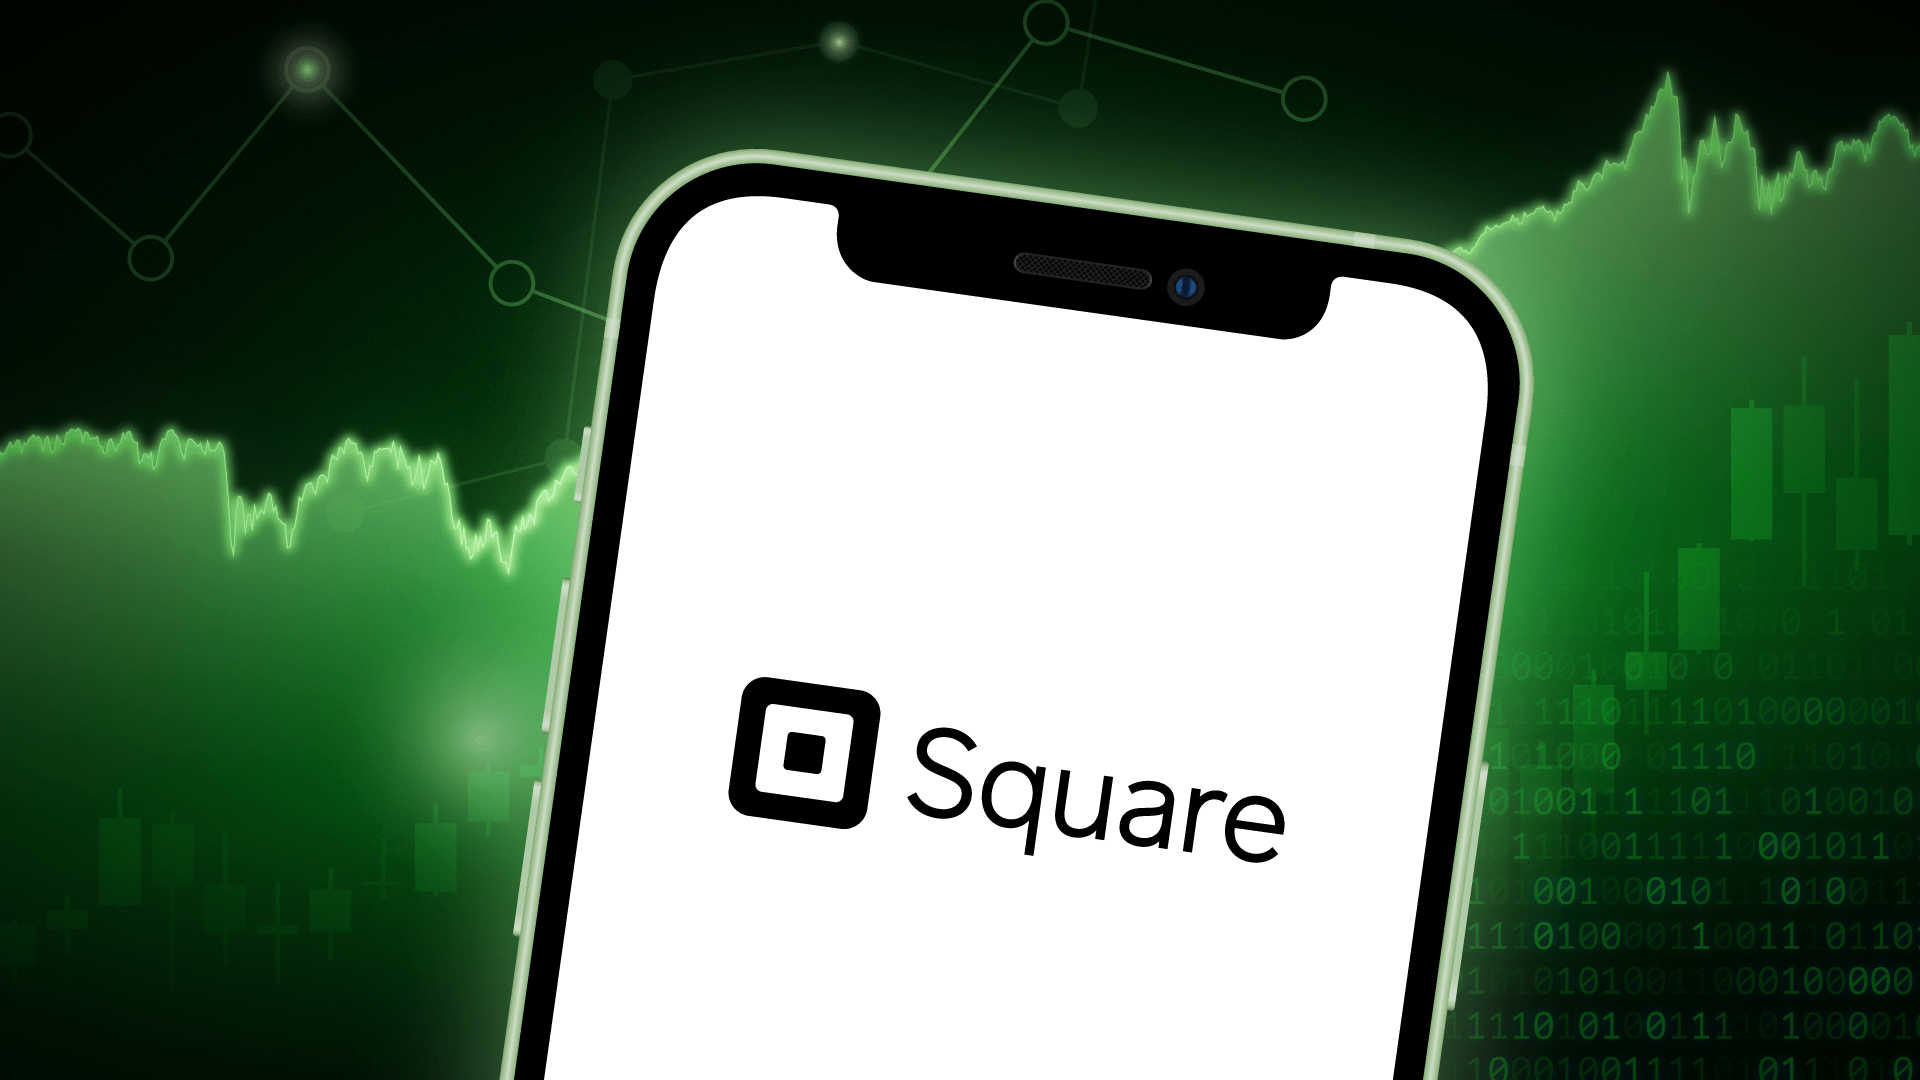 Square CEO, Jack Dorsey, has interest in developing an open and collaborative bitcoin mining system